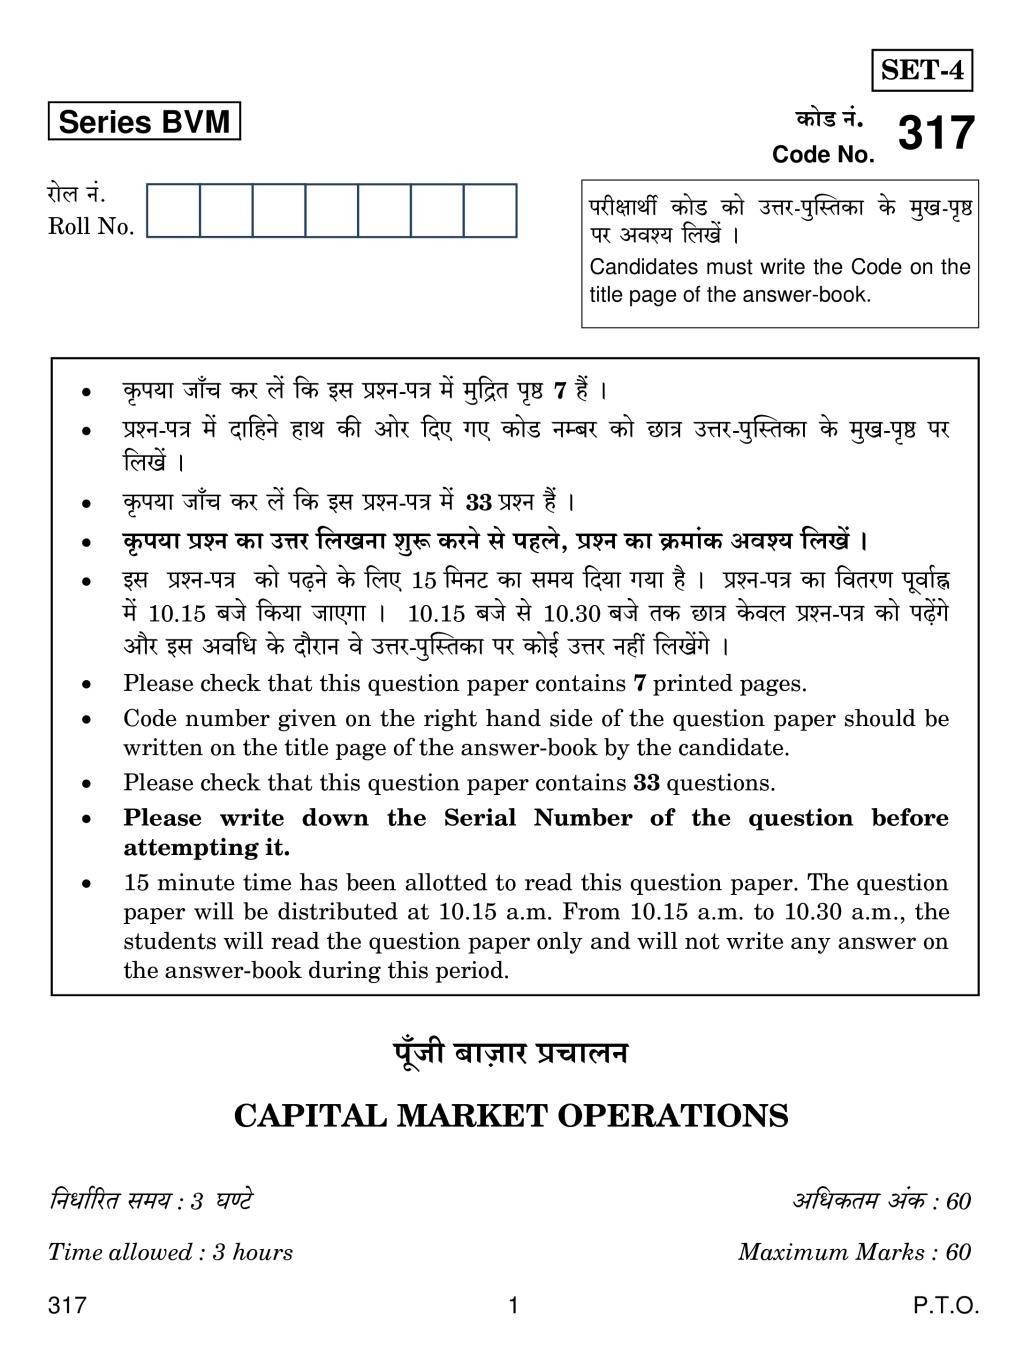 CBSE Class 12 Capital Market Operations Question Paper 2019 - Page 1